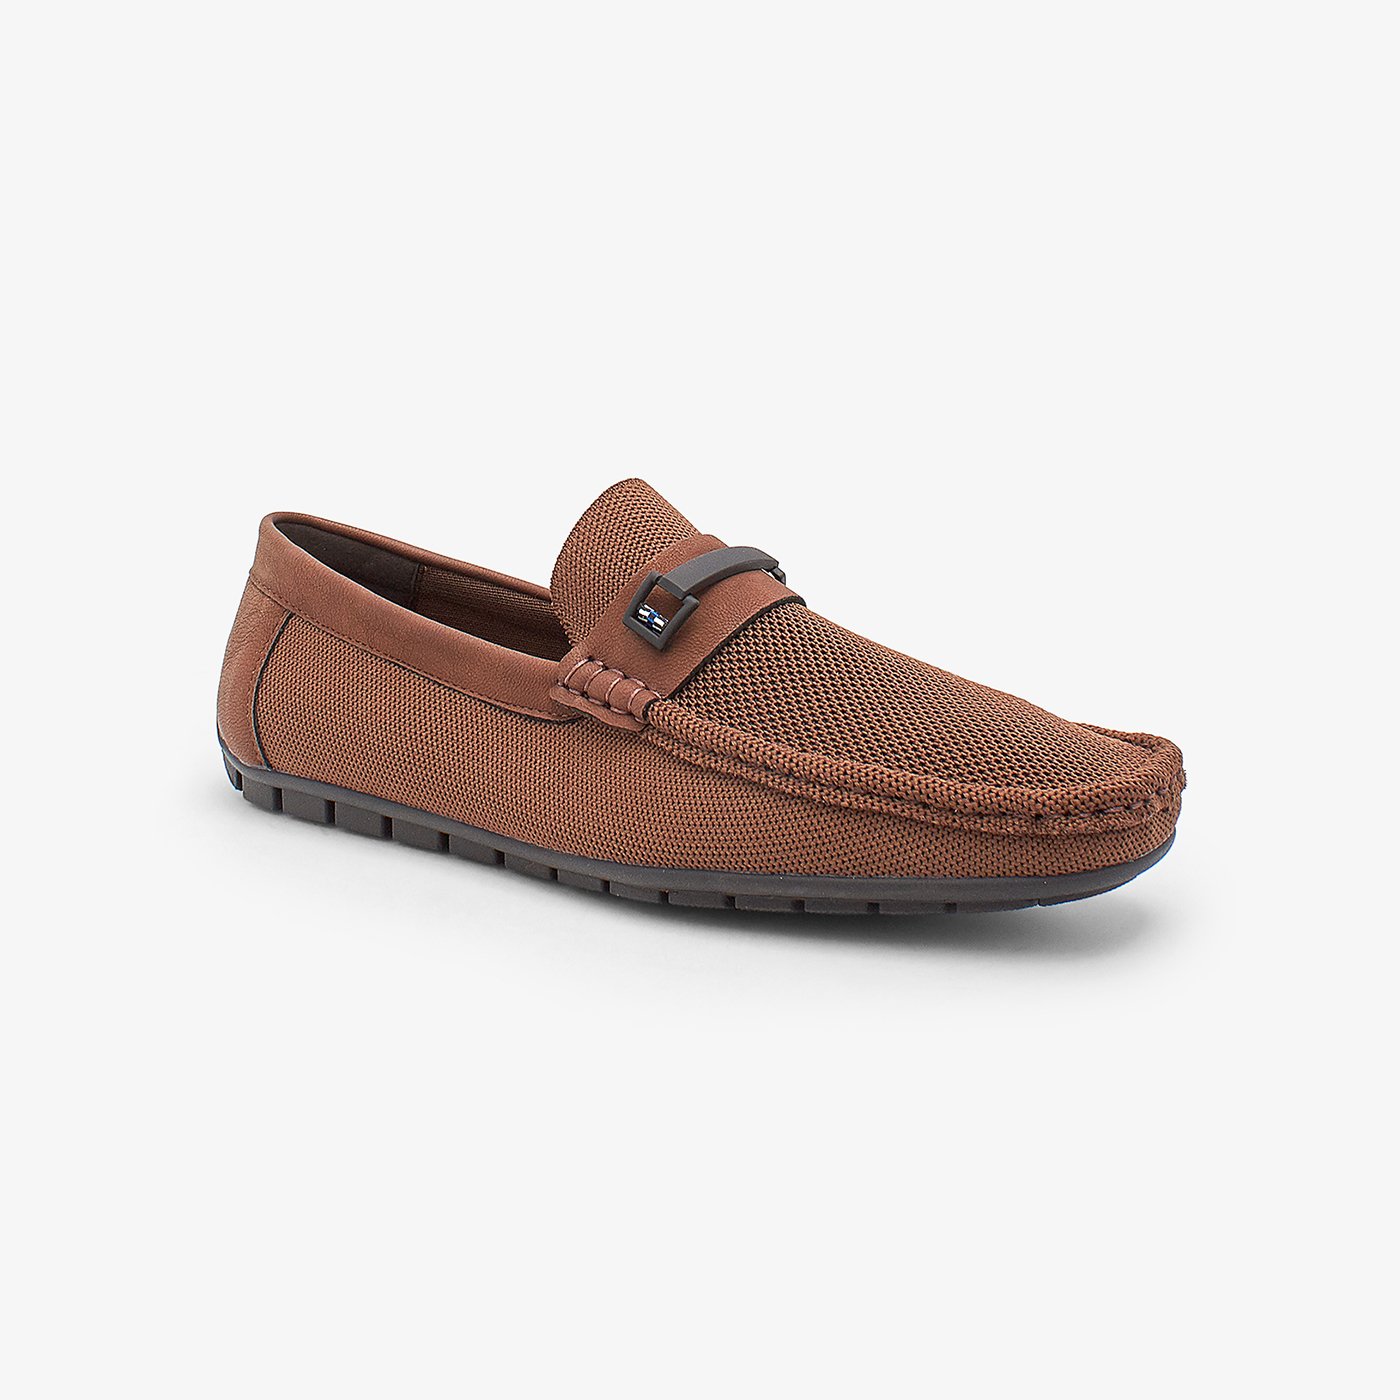 Stylish Loafers for Men